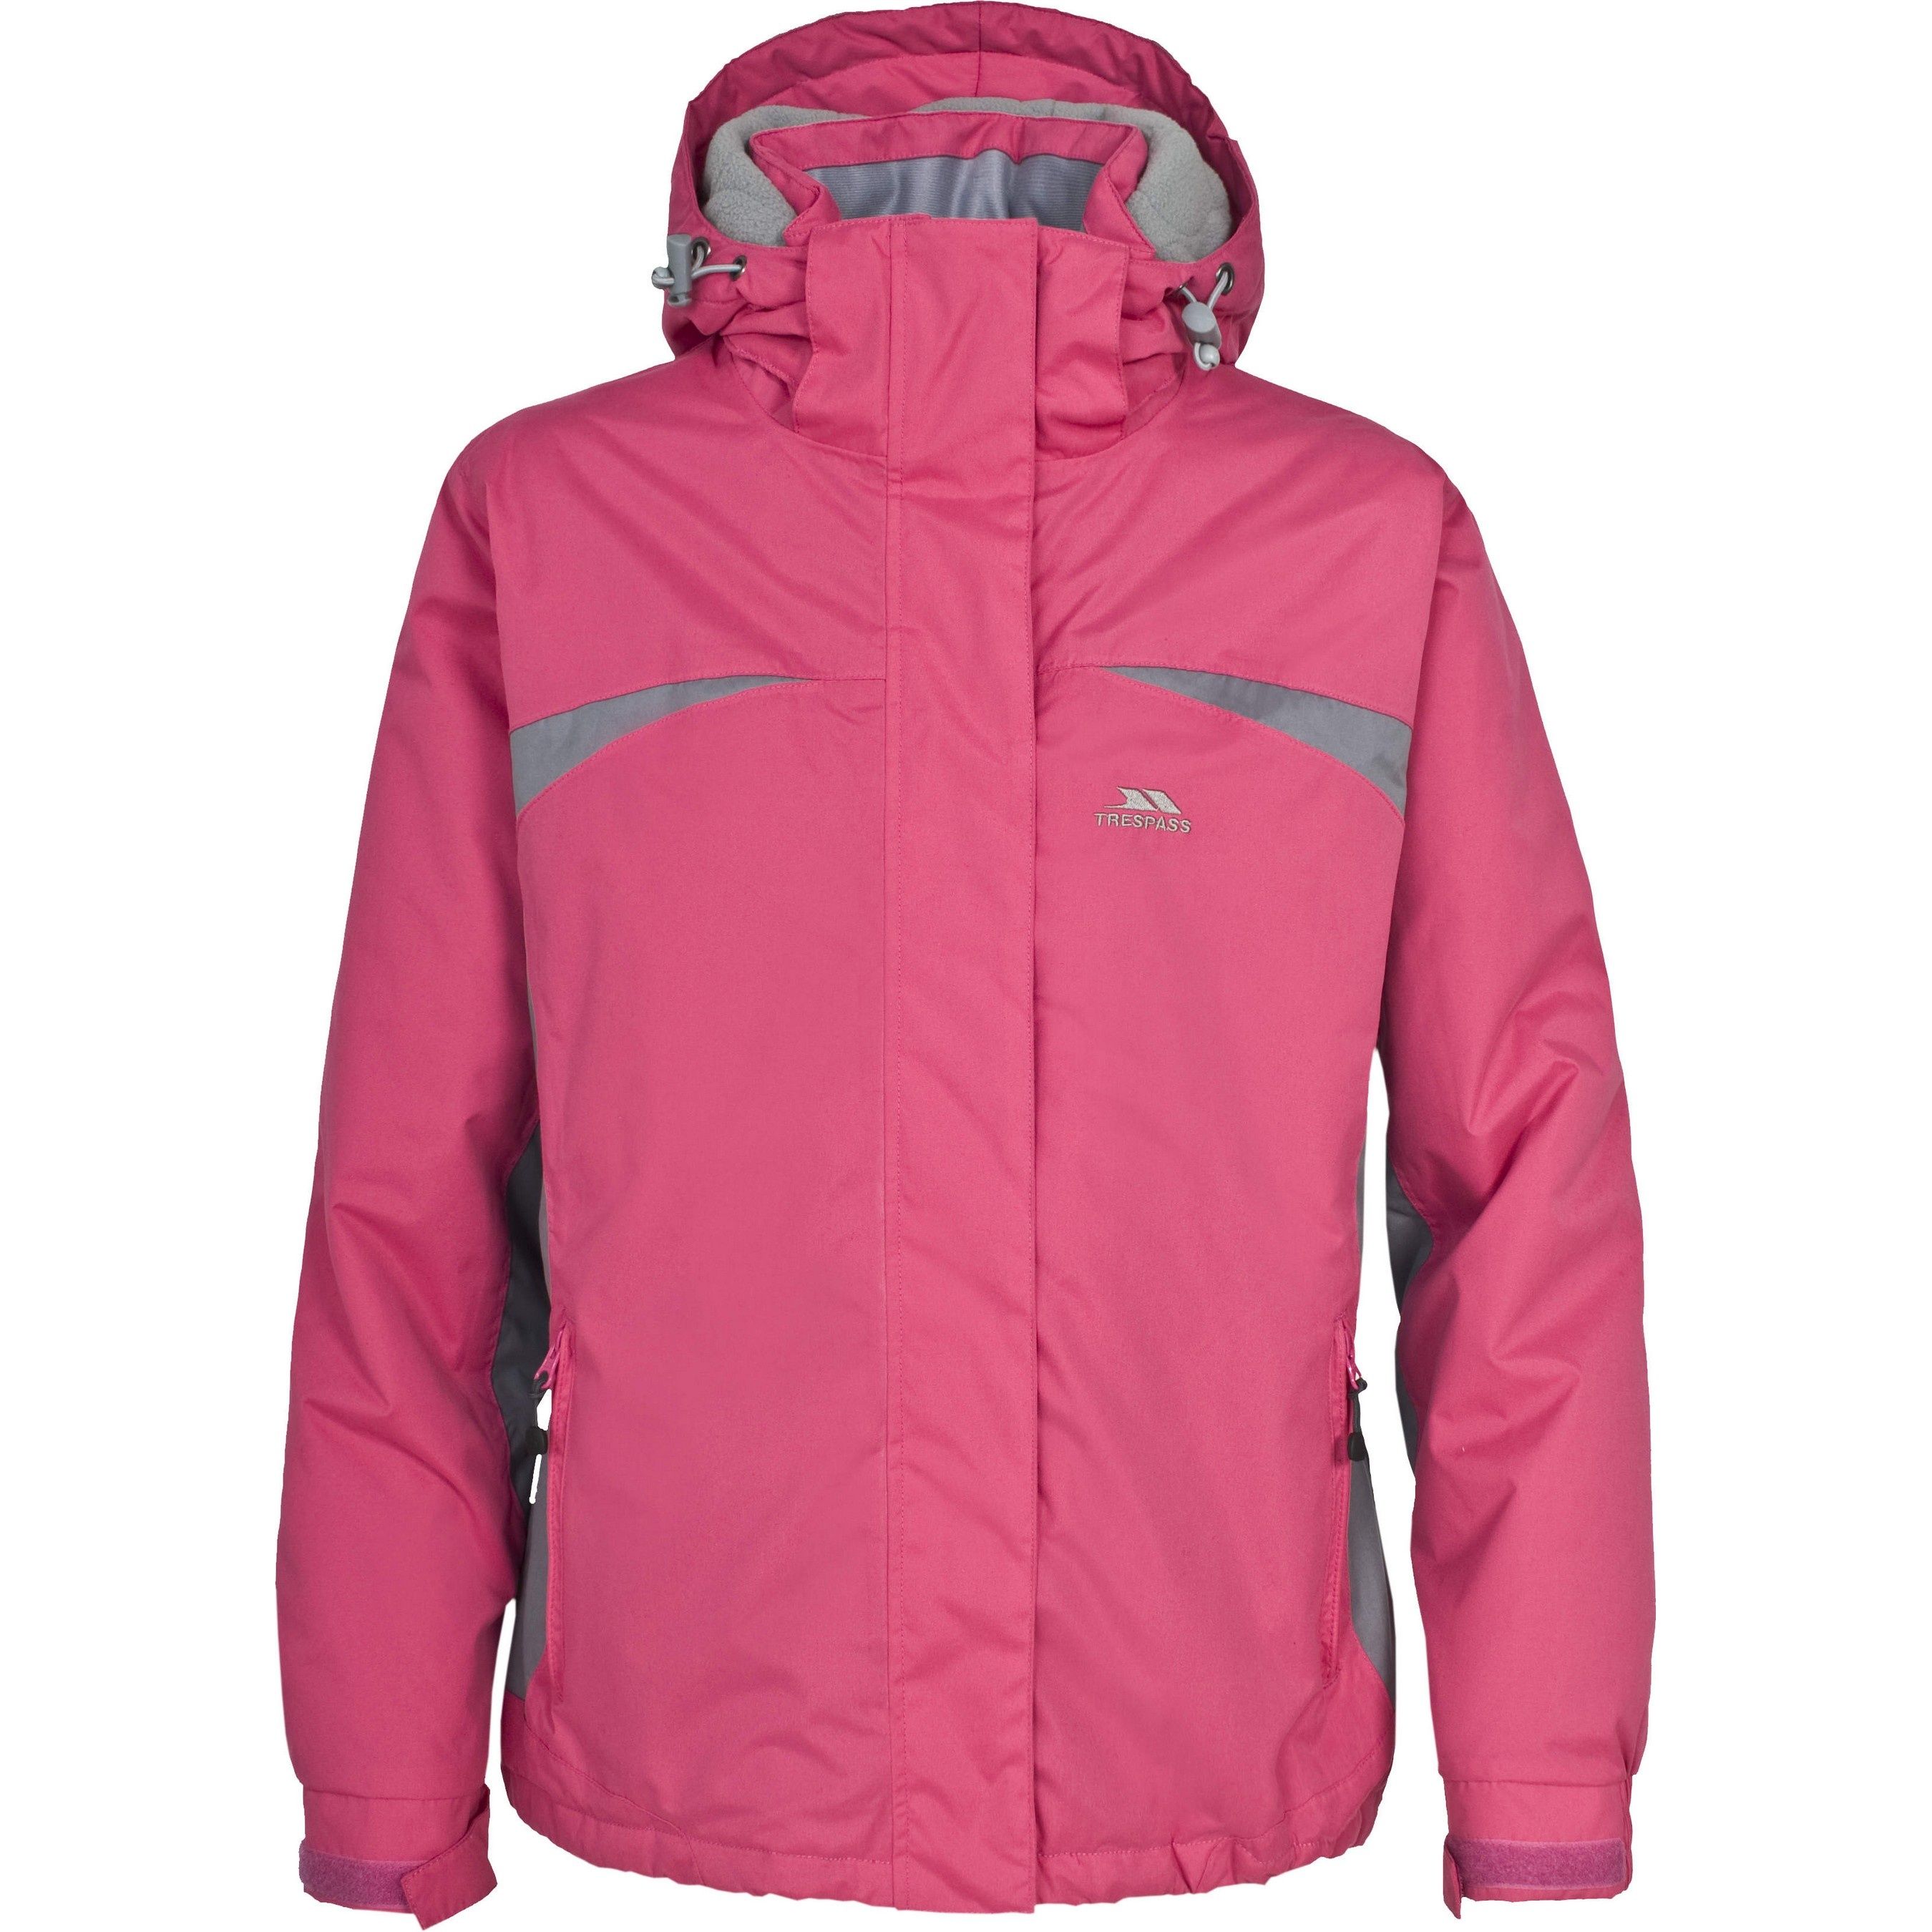 Girls waterproof thermal ski jacket with taped seams. Windproof. Coldheat insulation technology. Fleece lining. Removable pop-off hood. 2 front zip pockets. Soft feel fabric. Shell: 100% polyester. Microfibre PU coating. Lining: 100% polyester. Padding: 100% polyester. Sizing (chest): 9-10 (28in/71cm), 11-12 (31in/79cm), 13-14 (33in/84cm), 15-16 (34in/86cm).